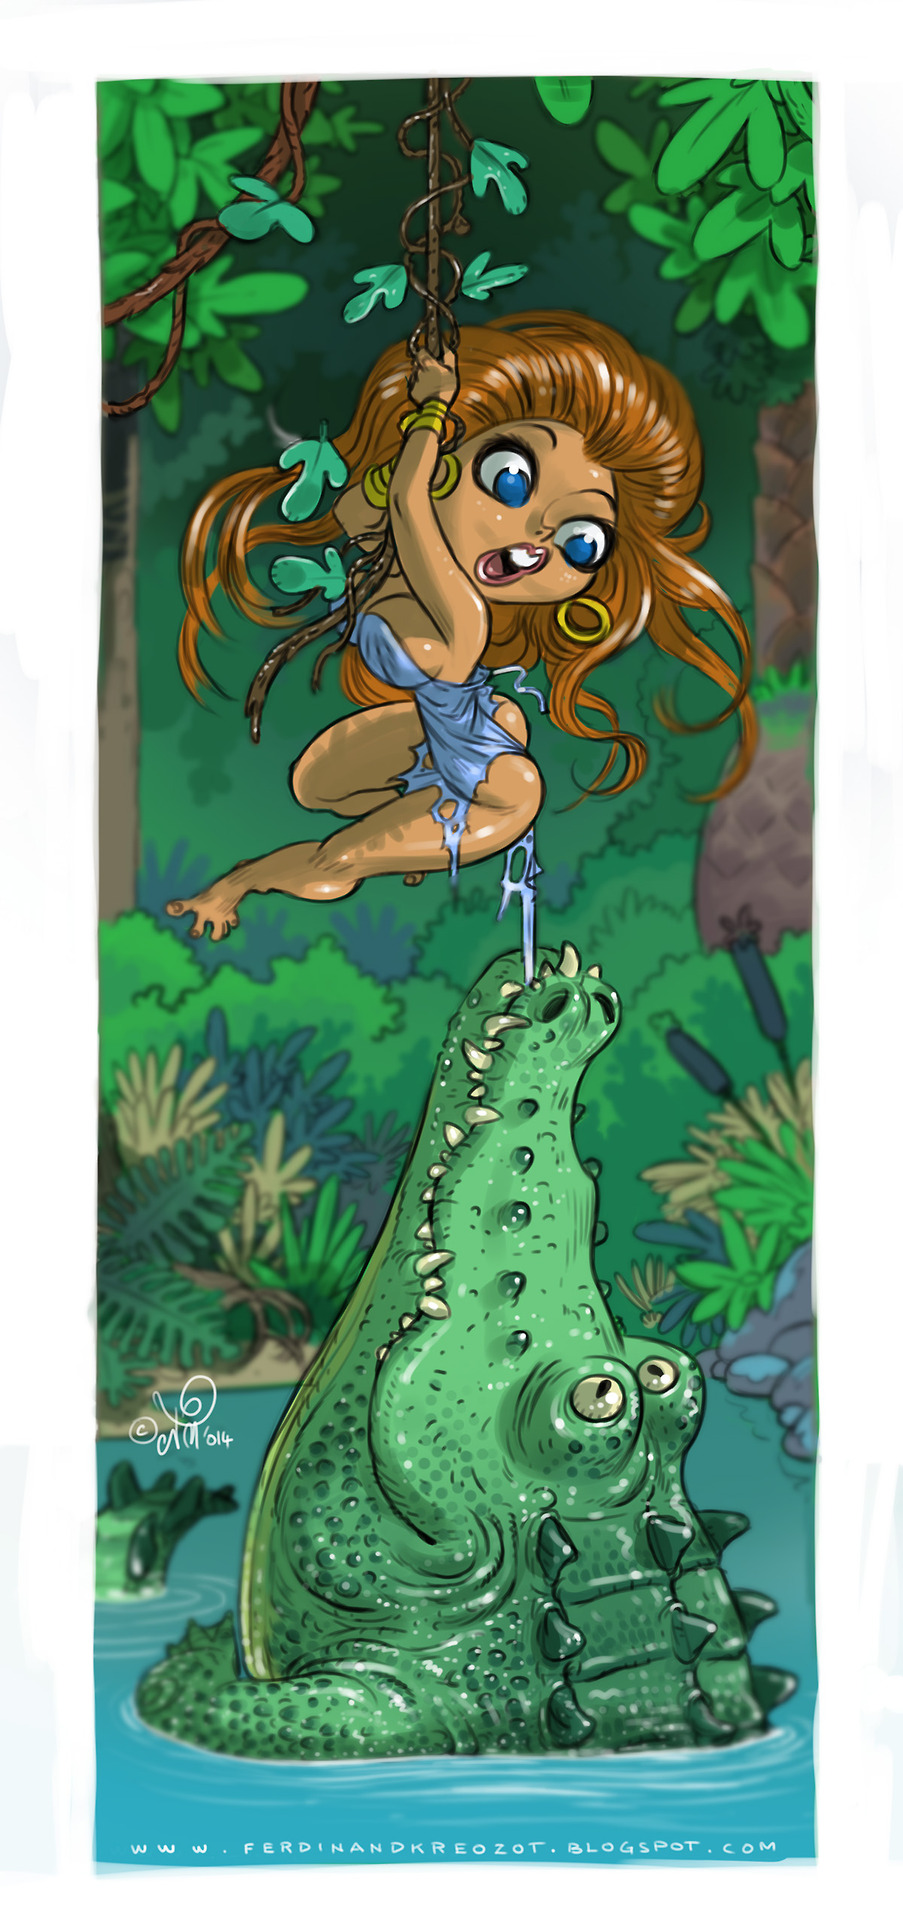 1girl 2014 ass biting blue_eyes bracelet brown_hair crocodile dress earrings jungle lake looking_down looking_up peril pulling reptile shiny shiny_skin torn_clothes torn_clothing vine water